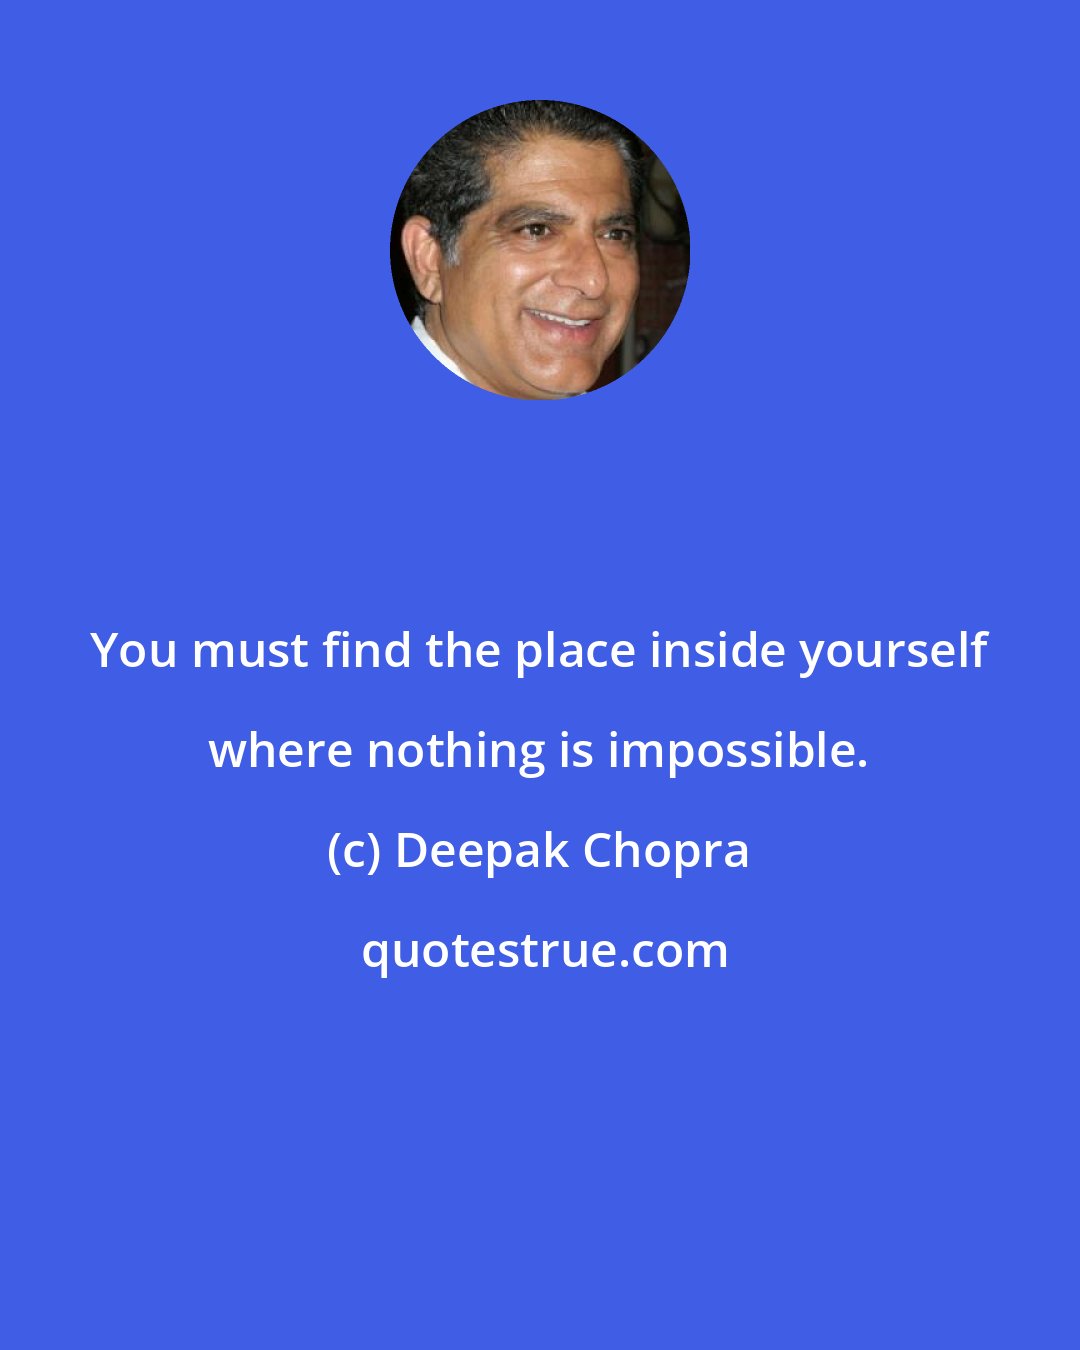 Deepak Chopra: You must find the place inside yourself where nothing is impossible.